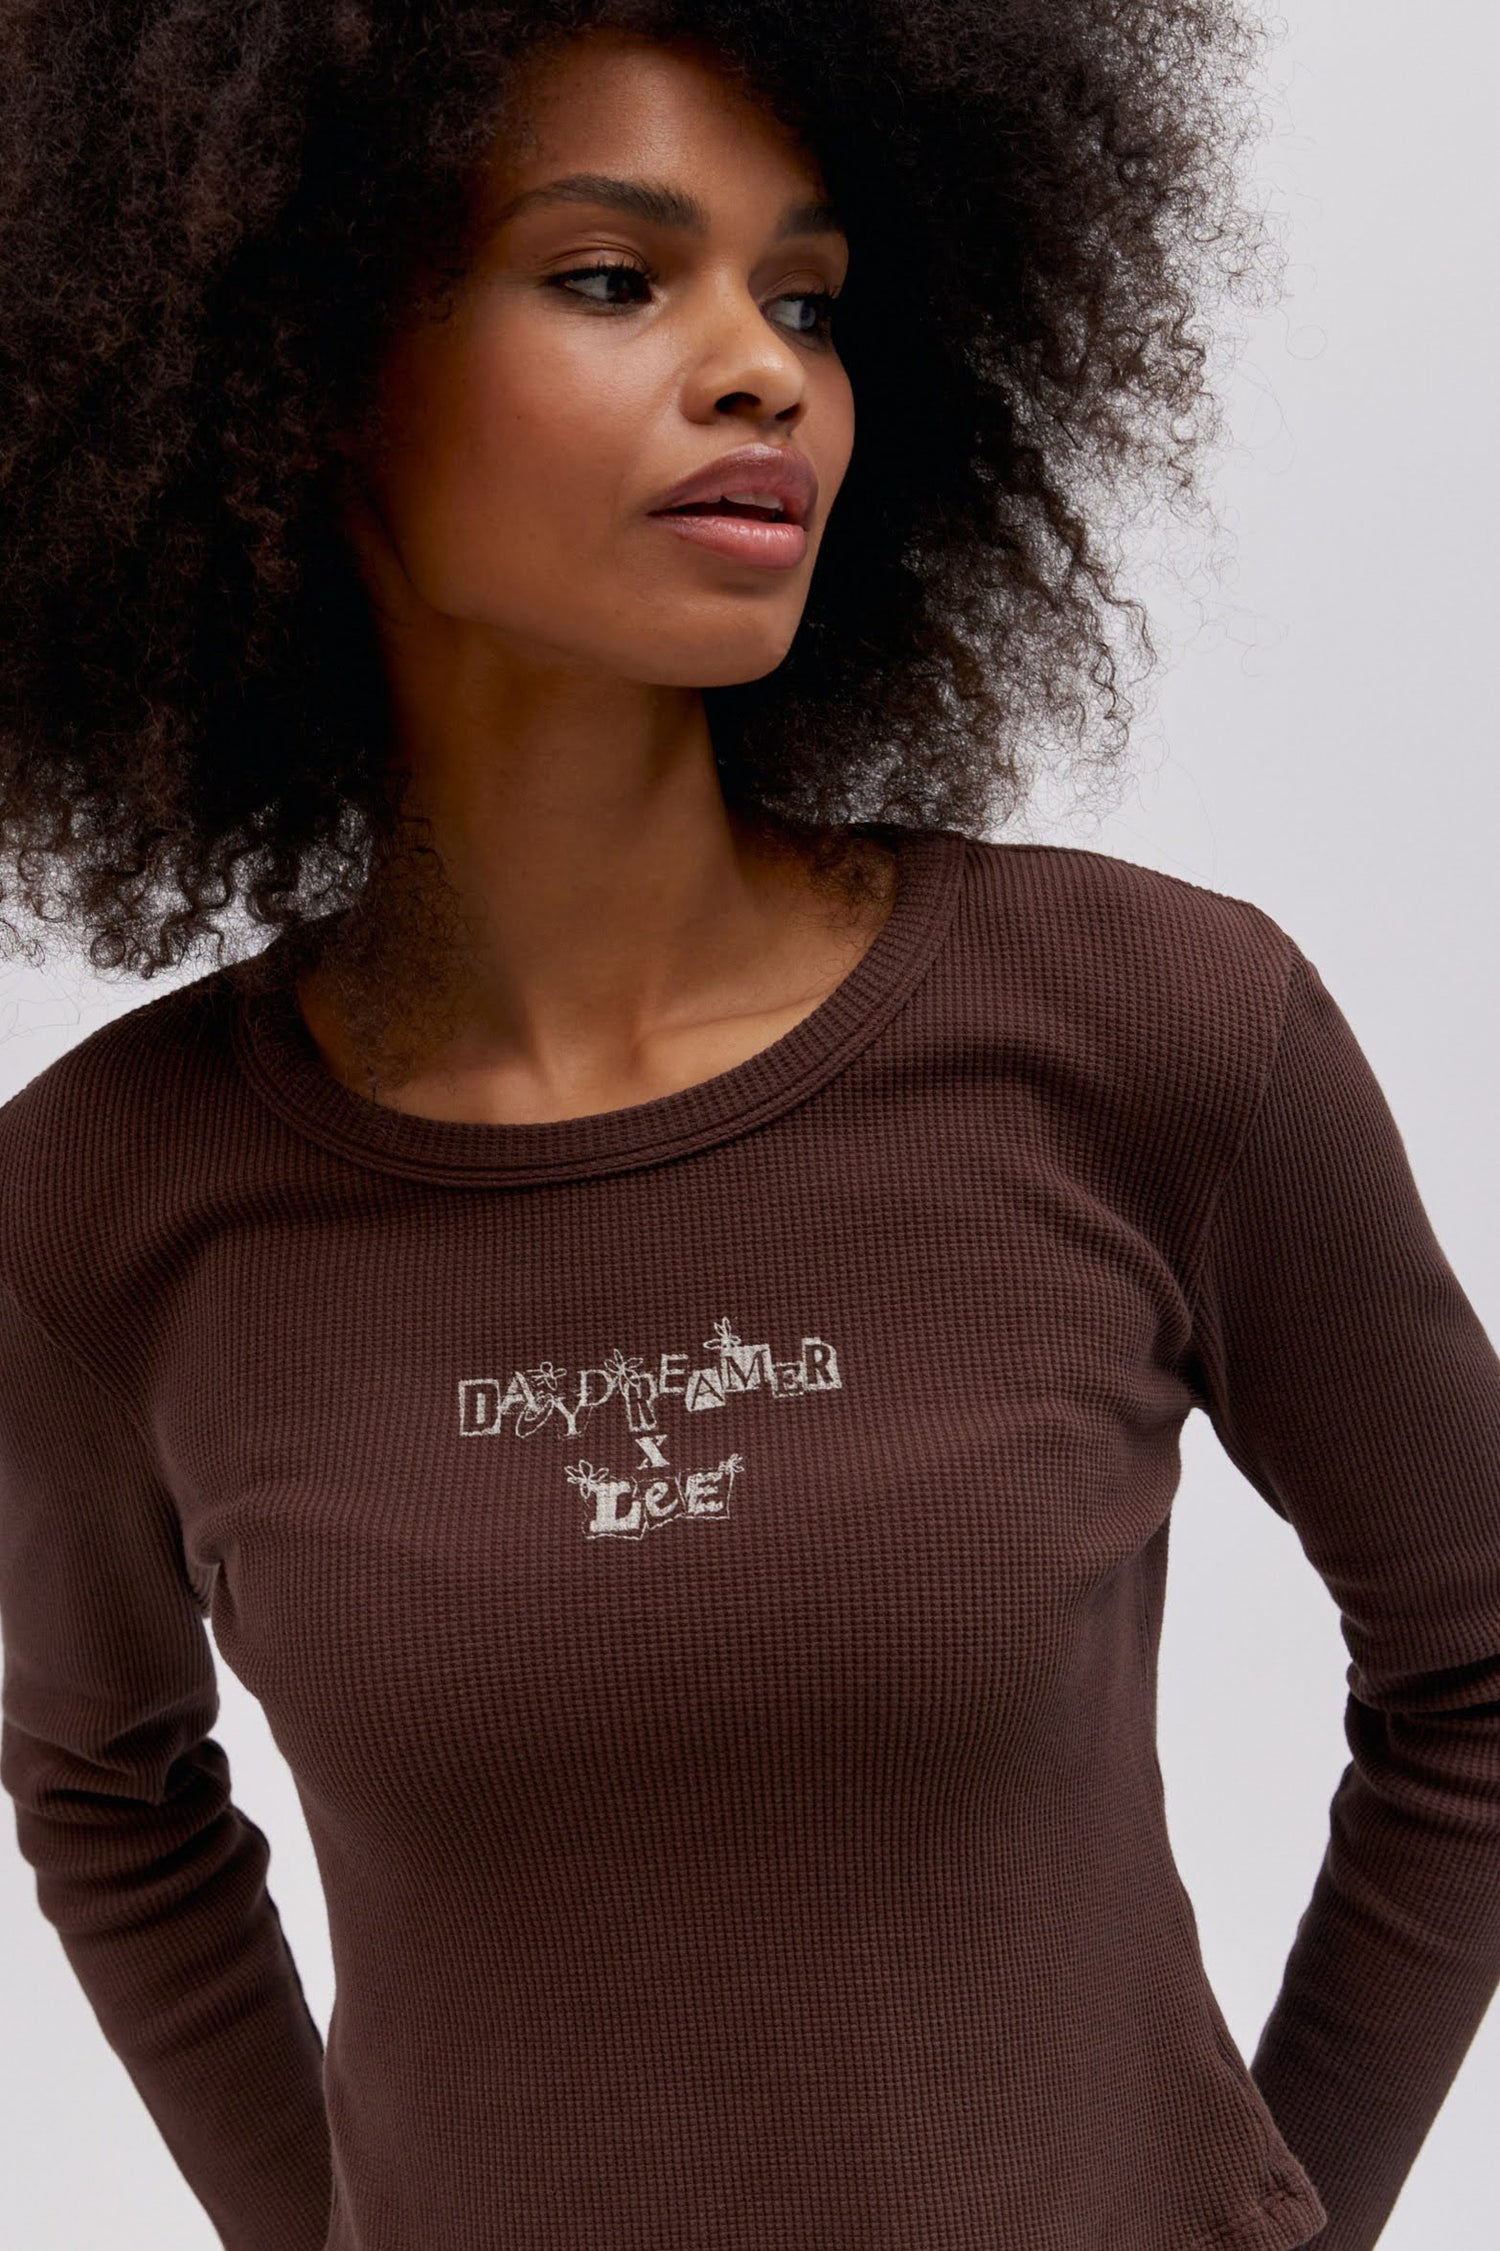 A curly-haired model featuring a coffee quarts colored shrunken thermal made with a slim fit, a cropped length, and designed with 'Daydreamer x Lee' in an original cut - paste style treatment accented with hand drawn graphic details.